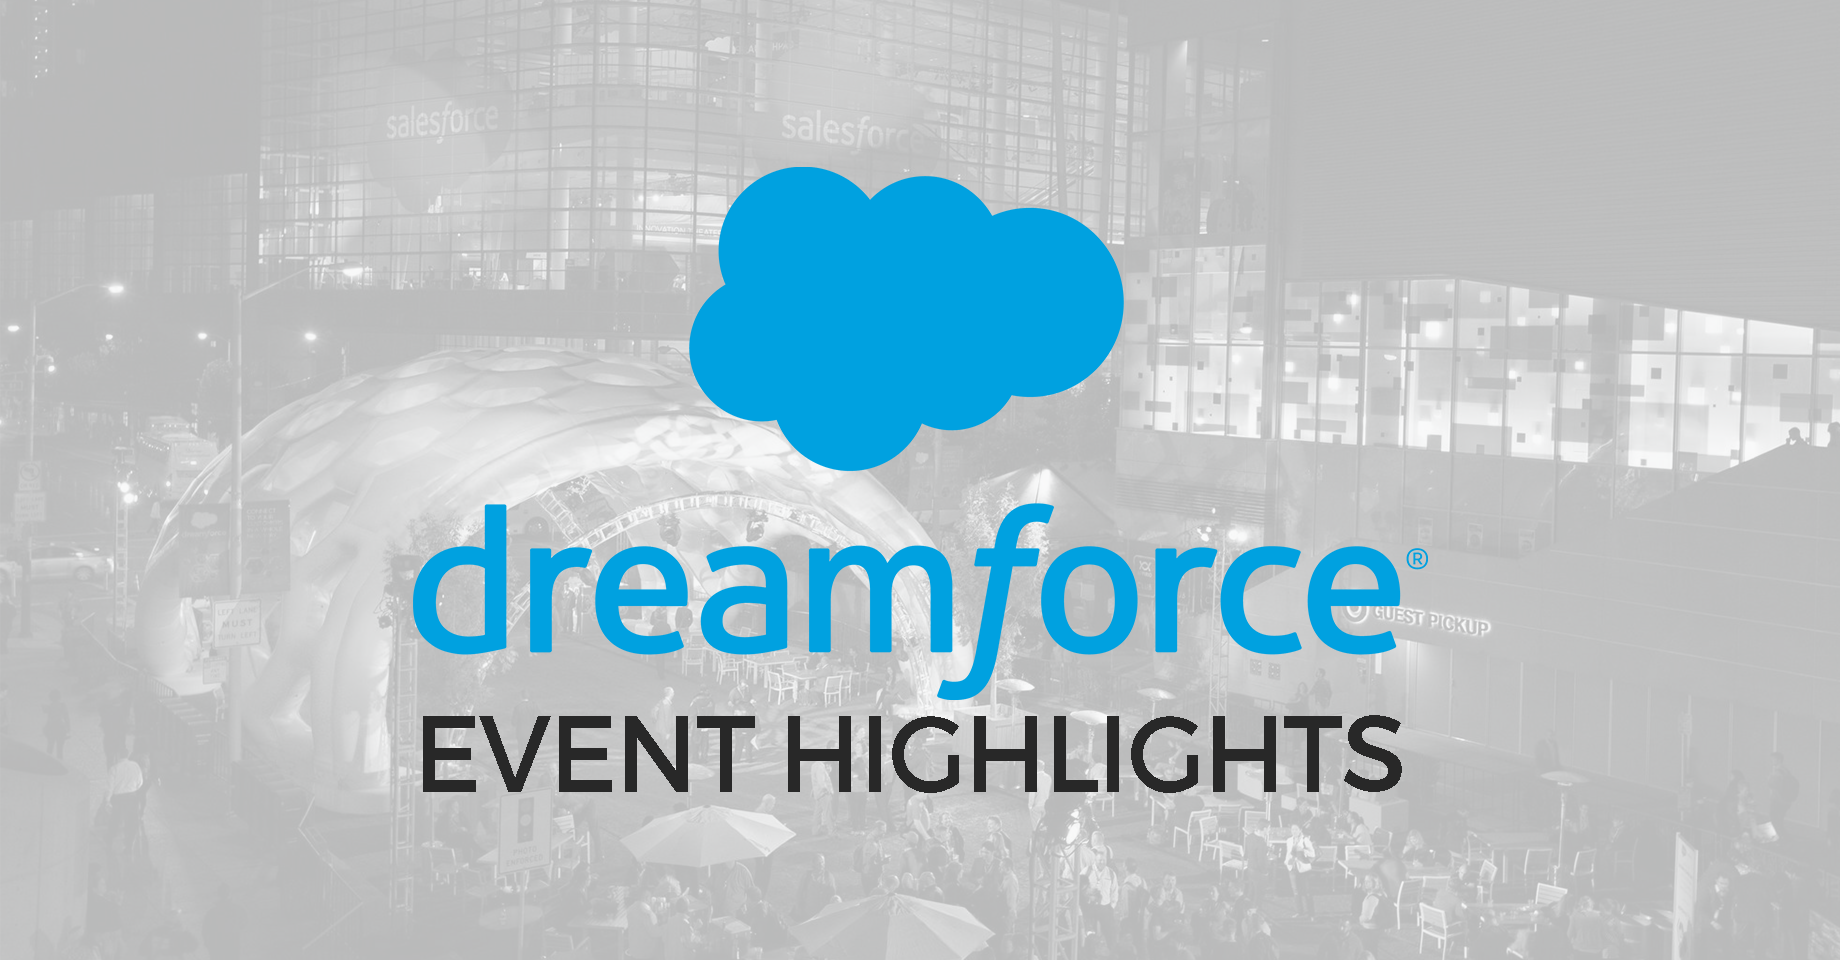 Dreamforce 2017: Highlights from this Year's Event